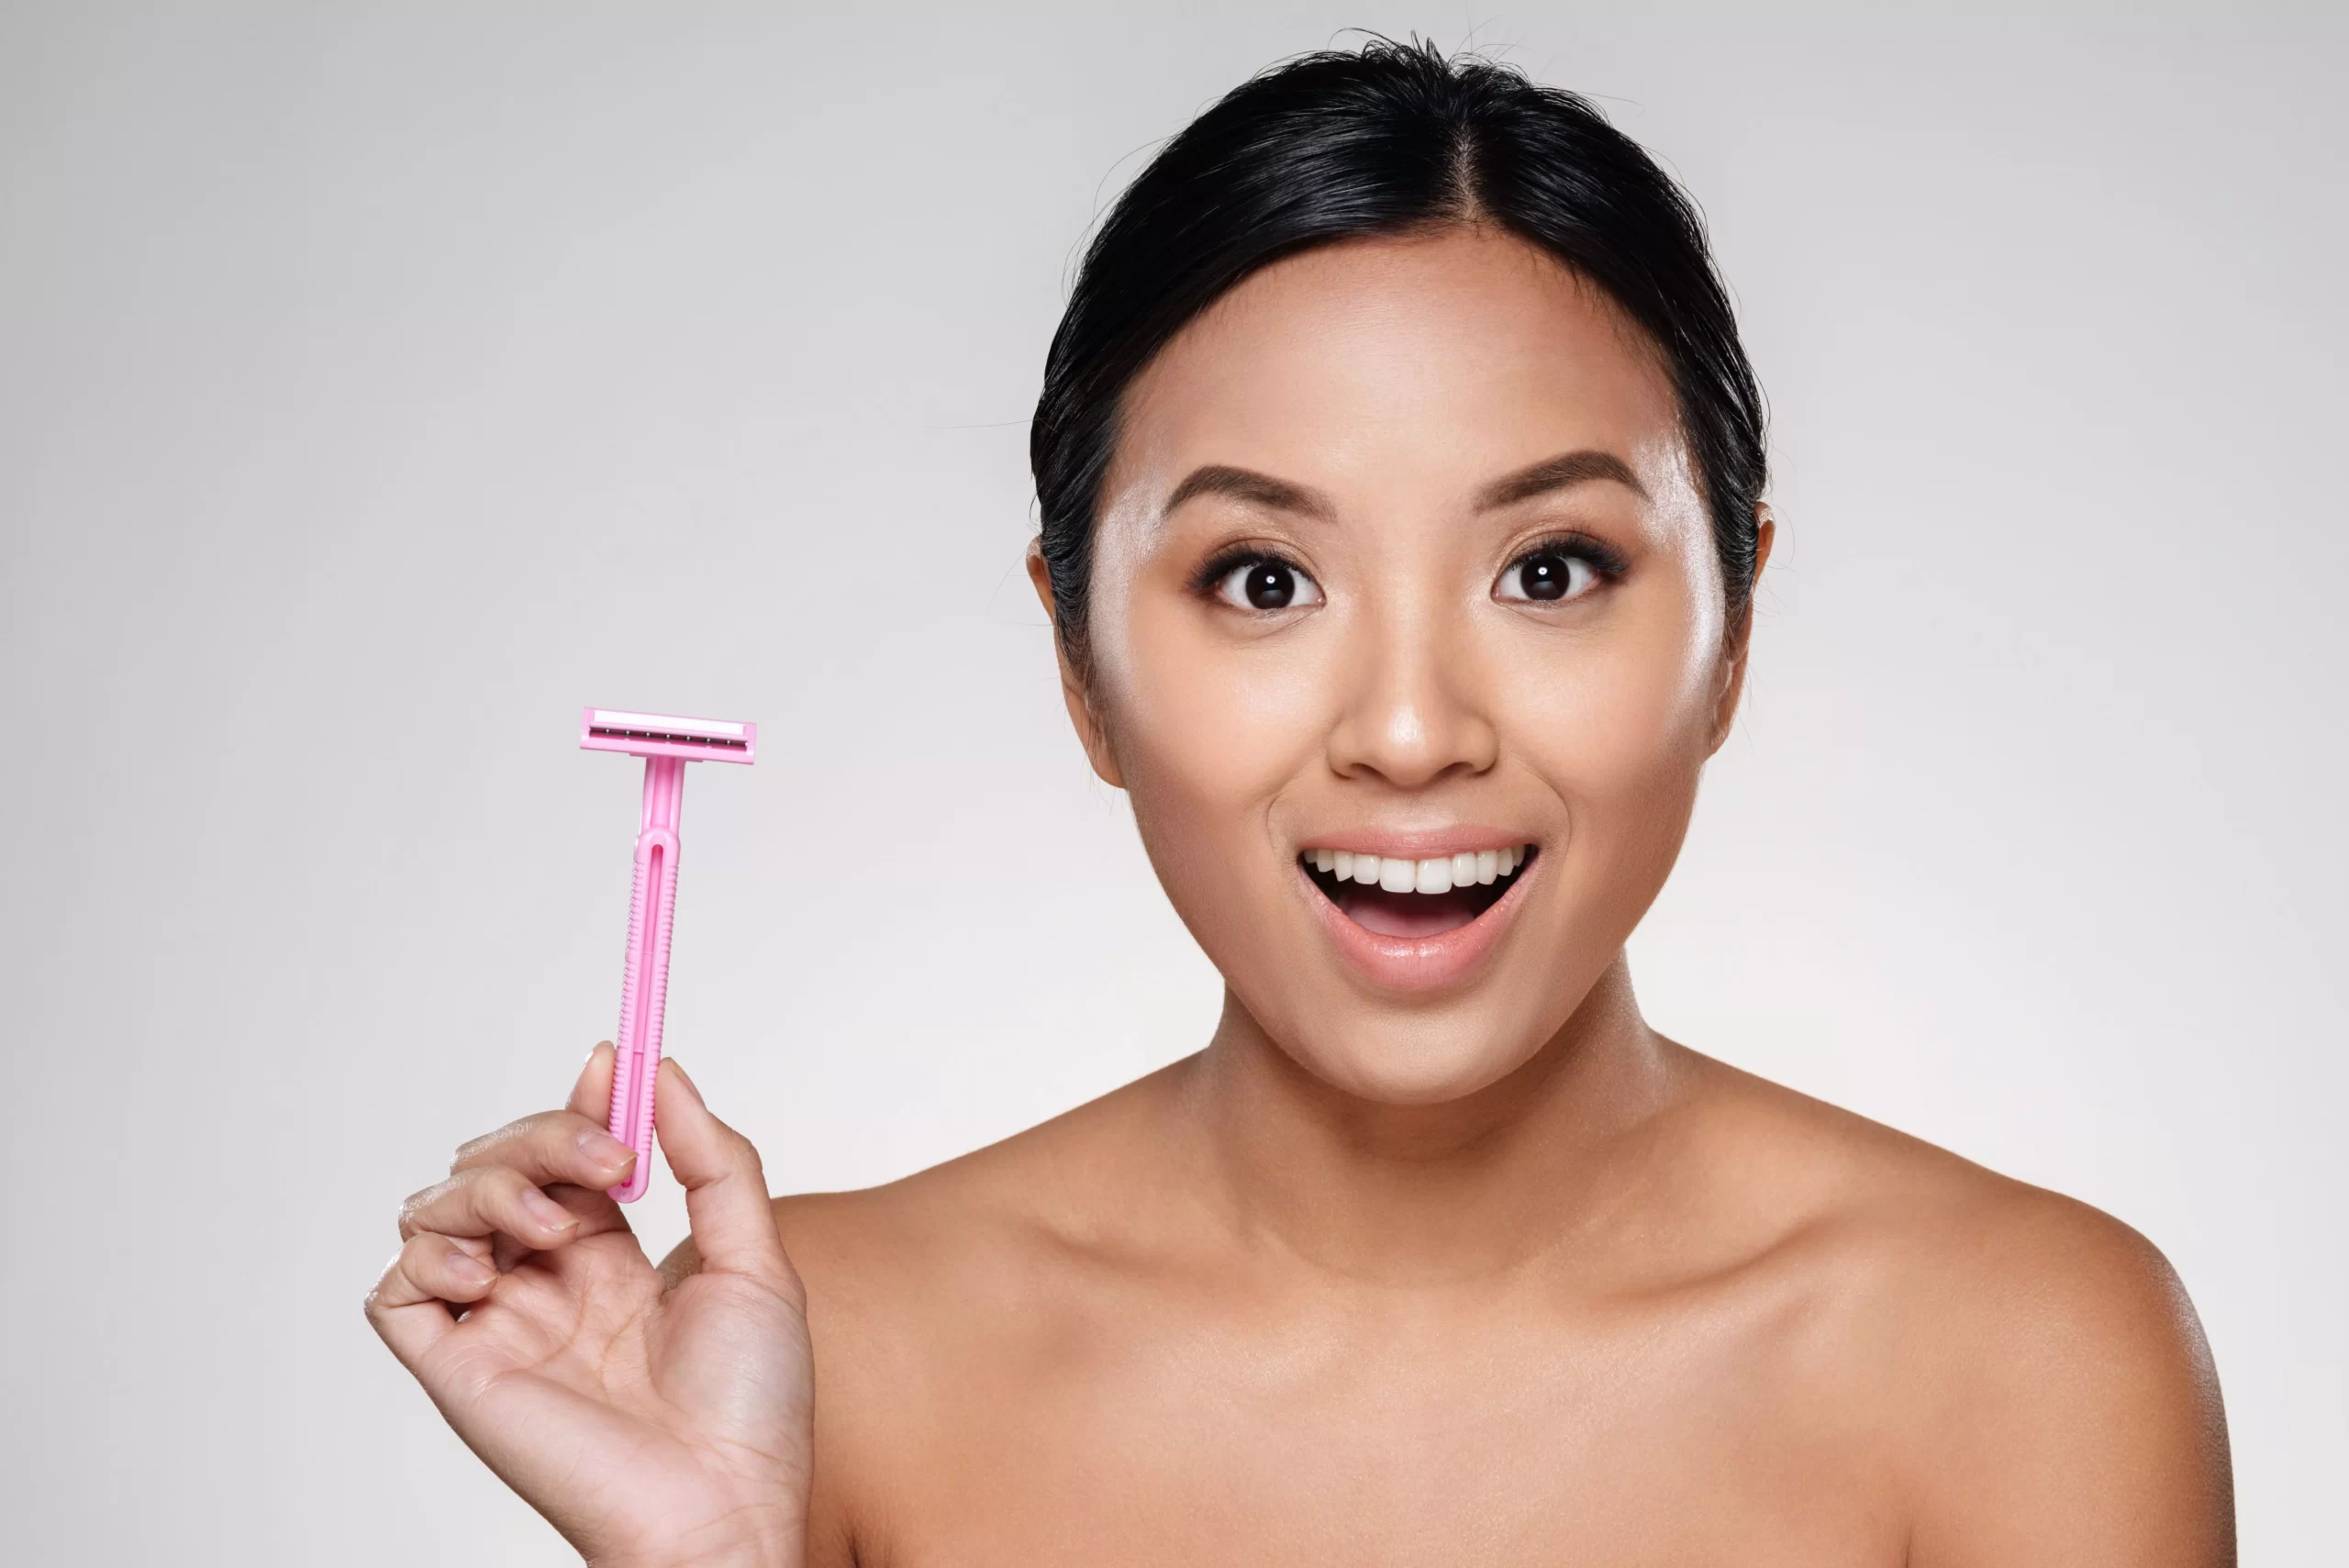 cheerful lady looking camera smiling with Venus Razor